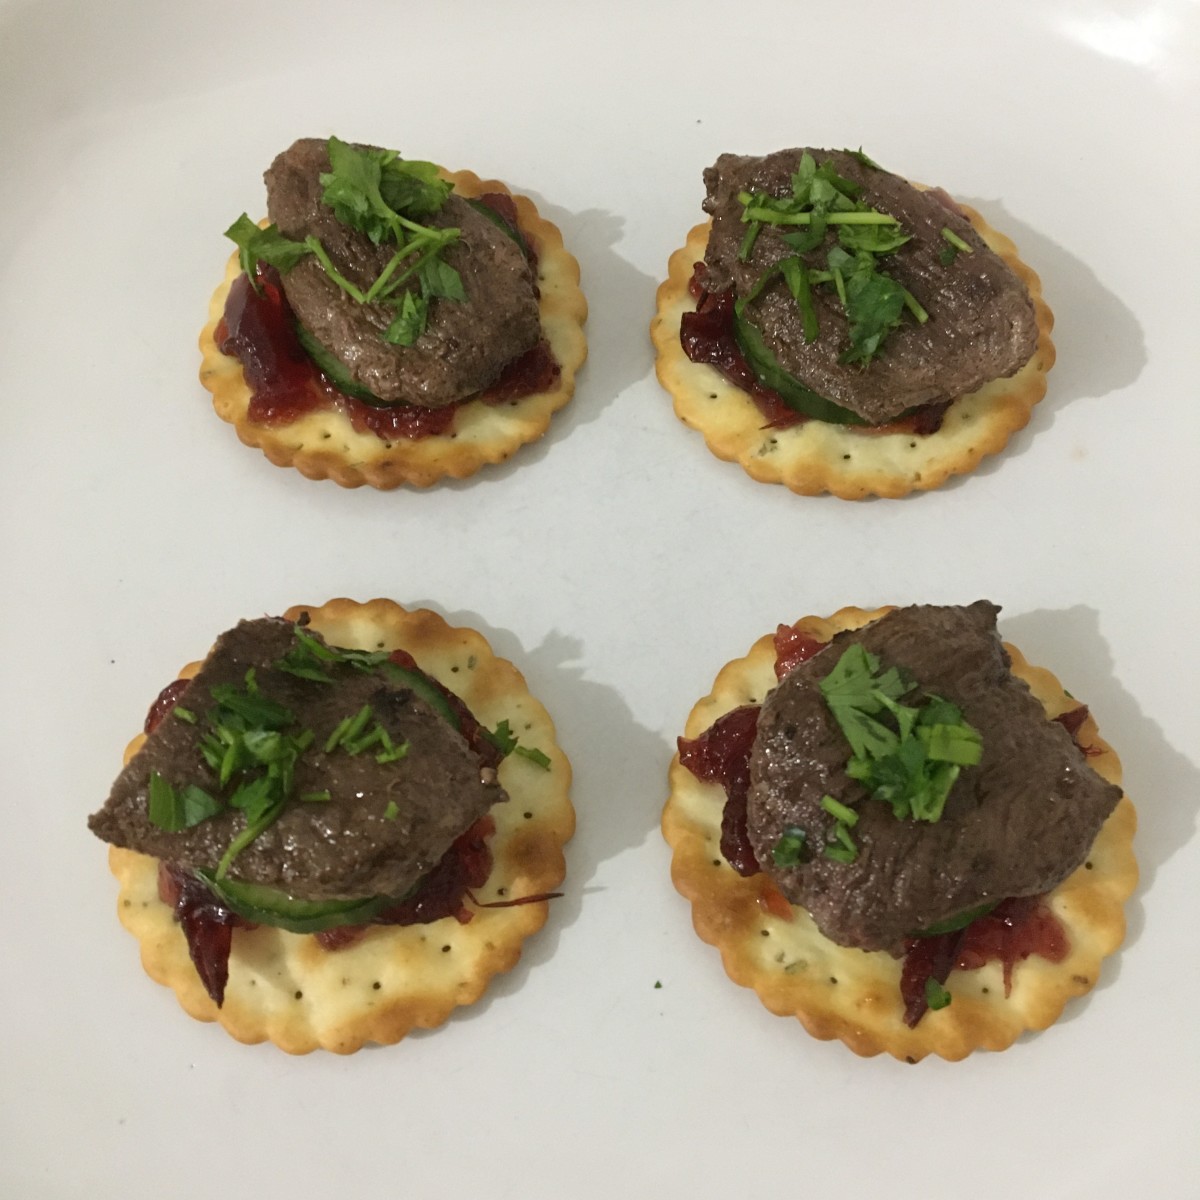 Goose and cranberry sauce on rosemary and garlic crackers